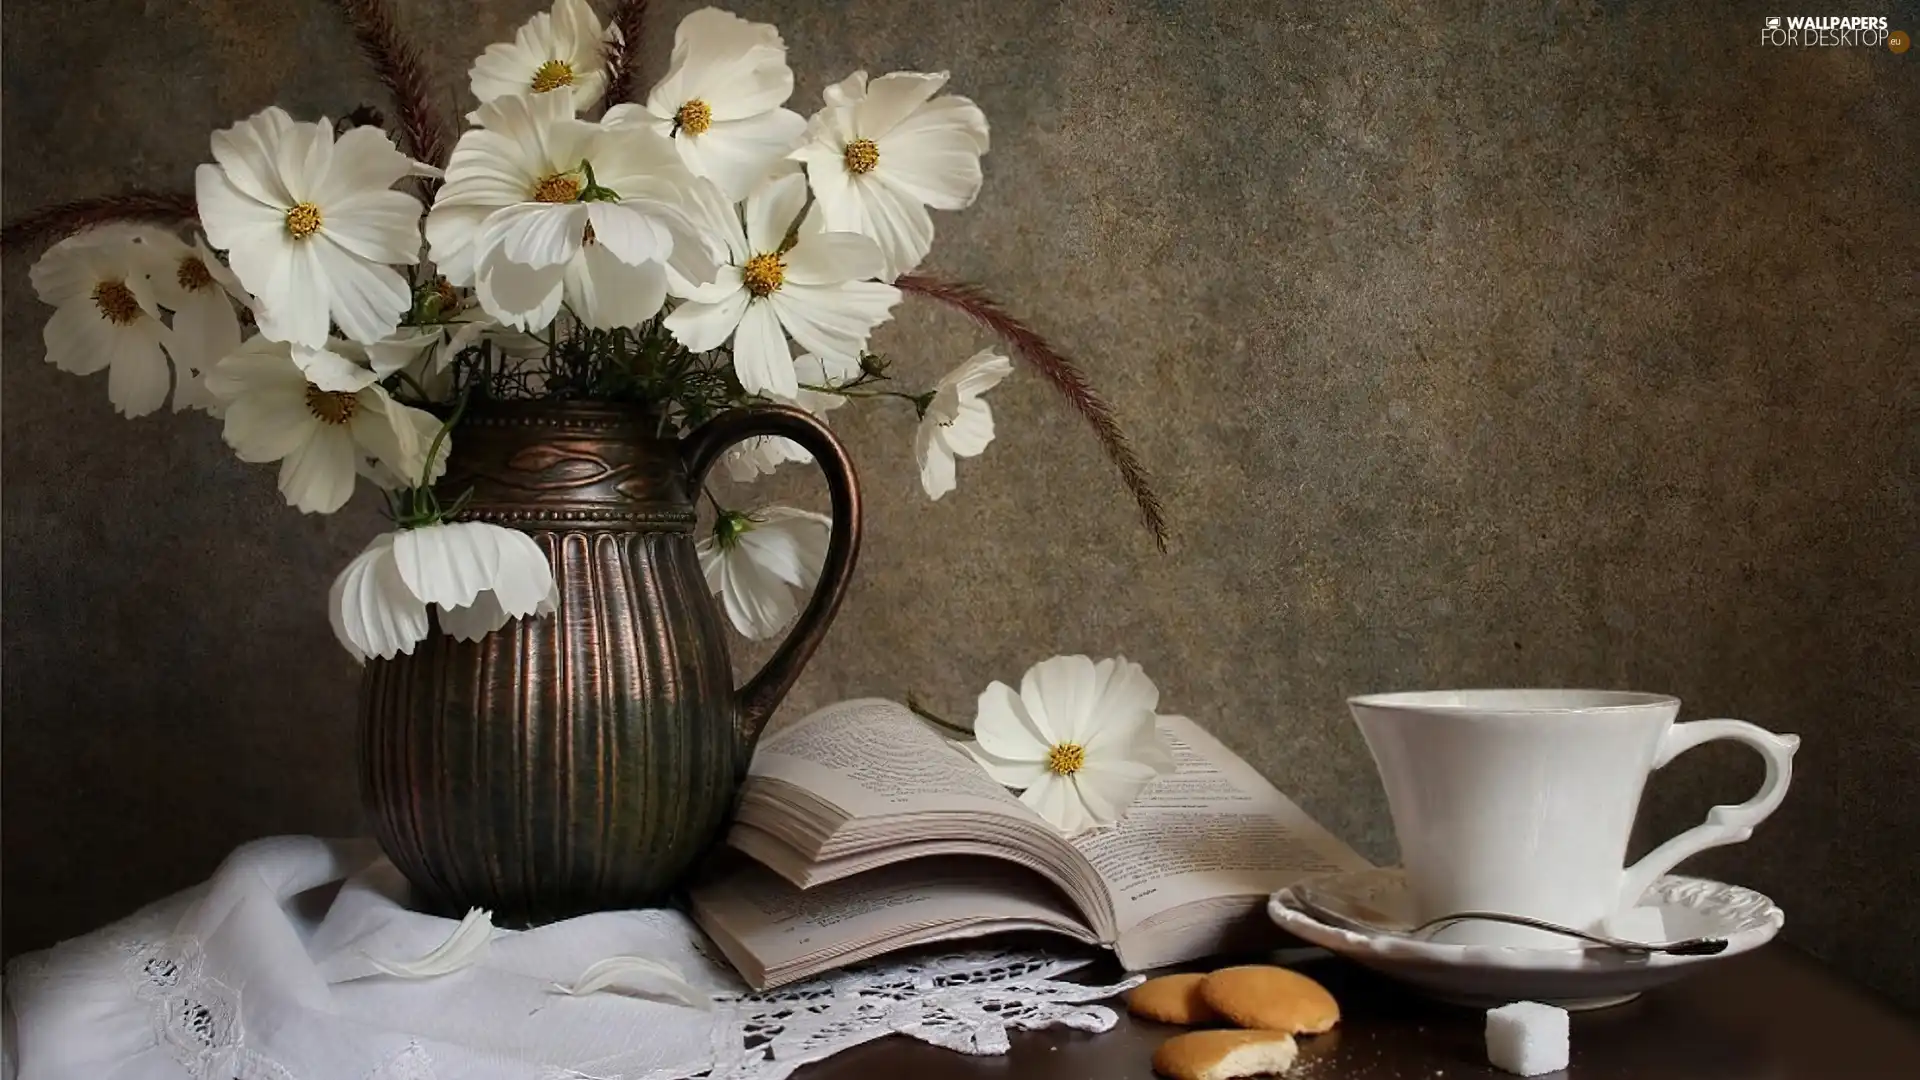 Book, cup, Cosmos, bowl, White